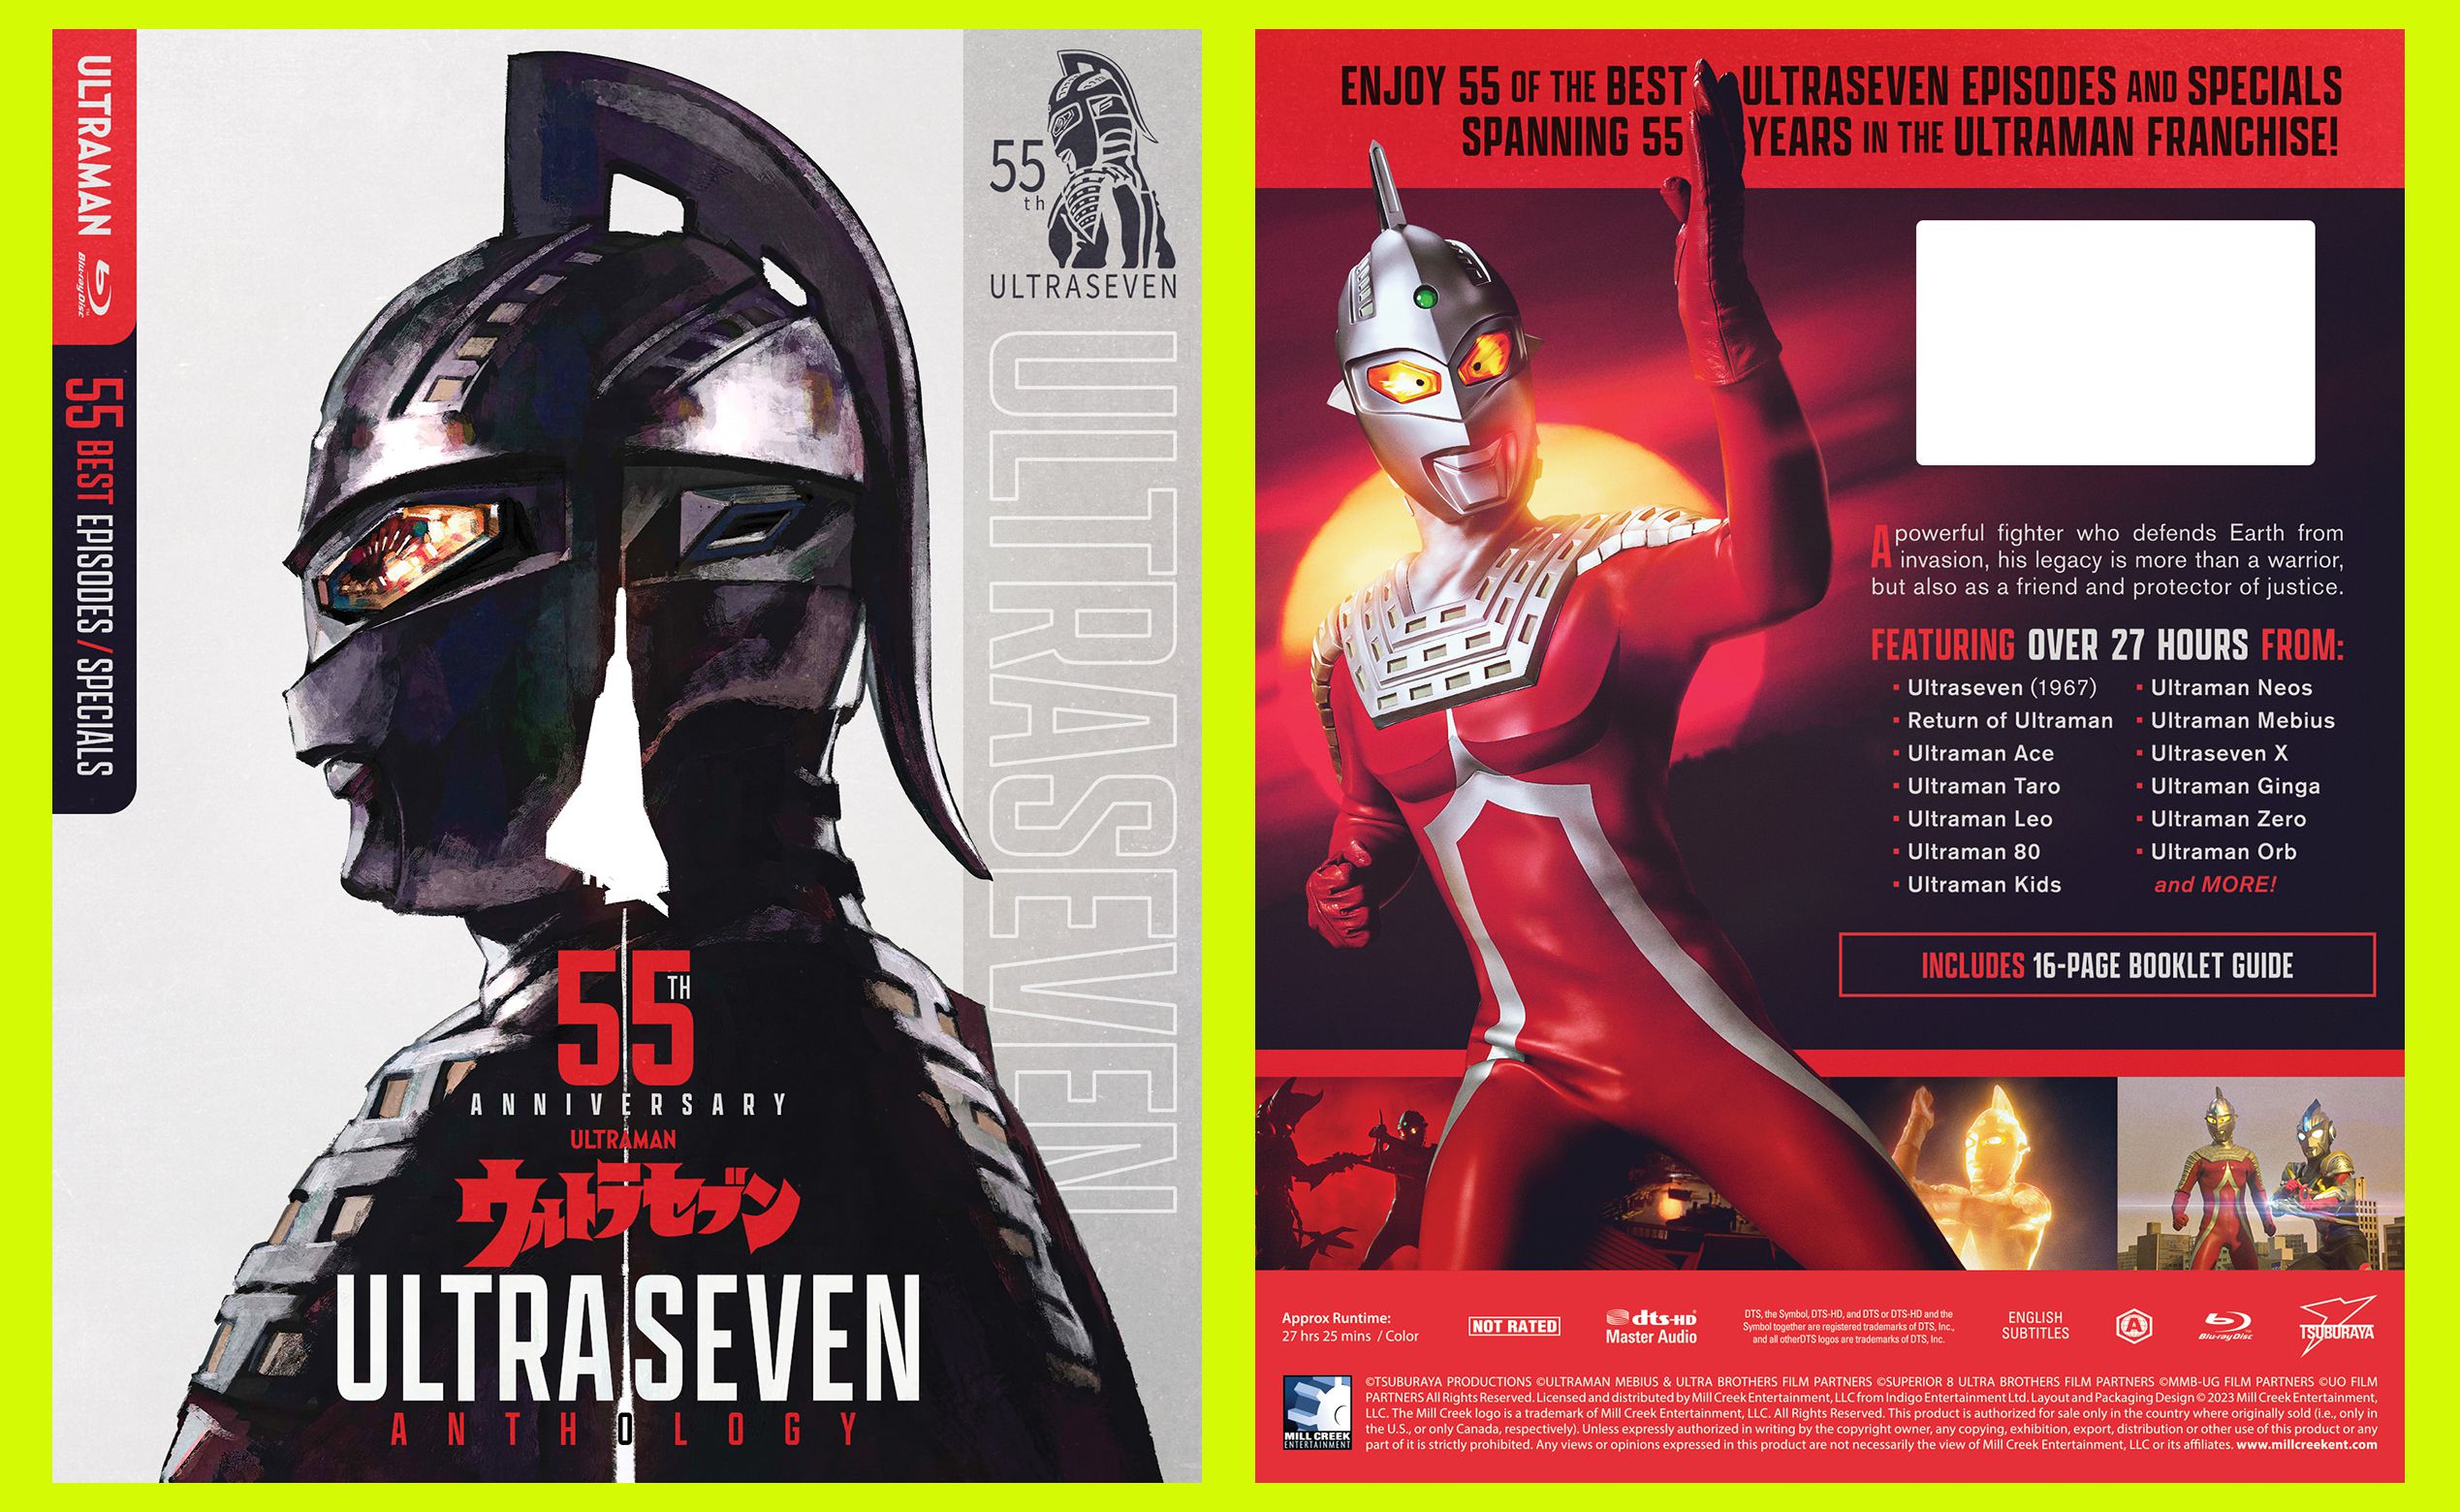 ULTRASEVEN: 55TH ANNIVERSARY ANTHOLOGY - Complete Contents and